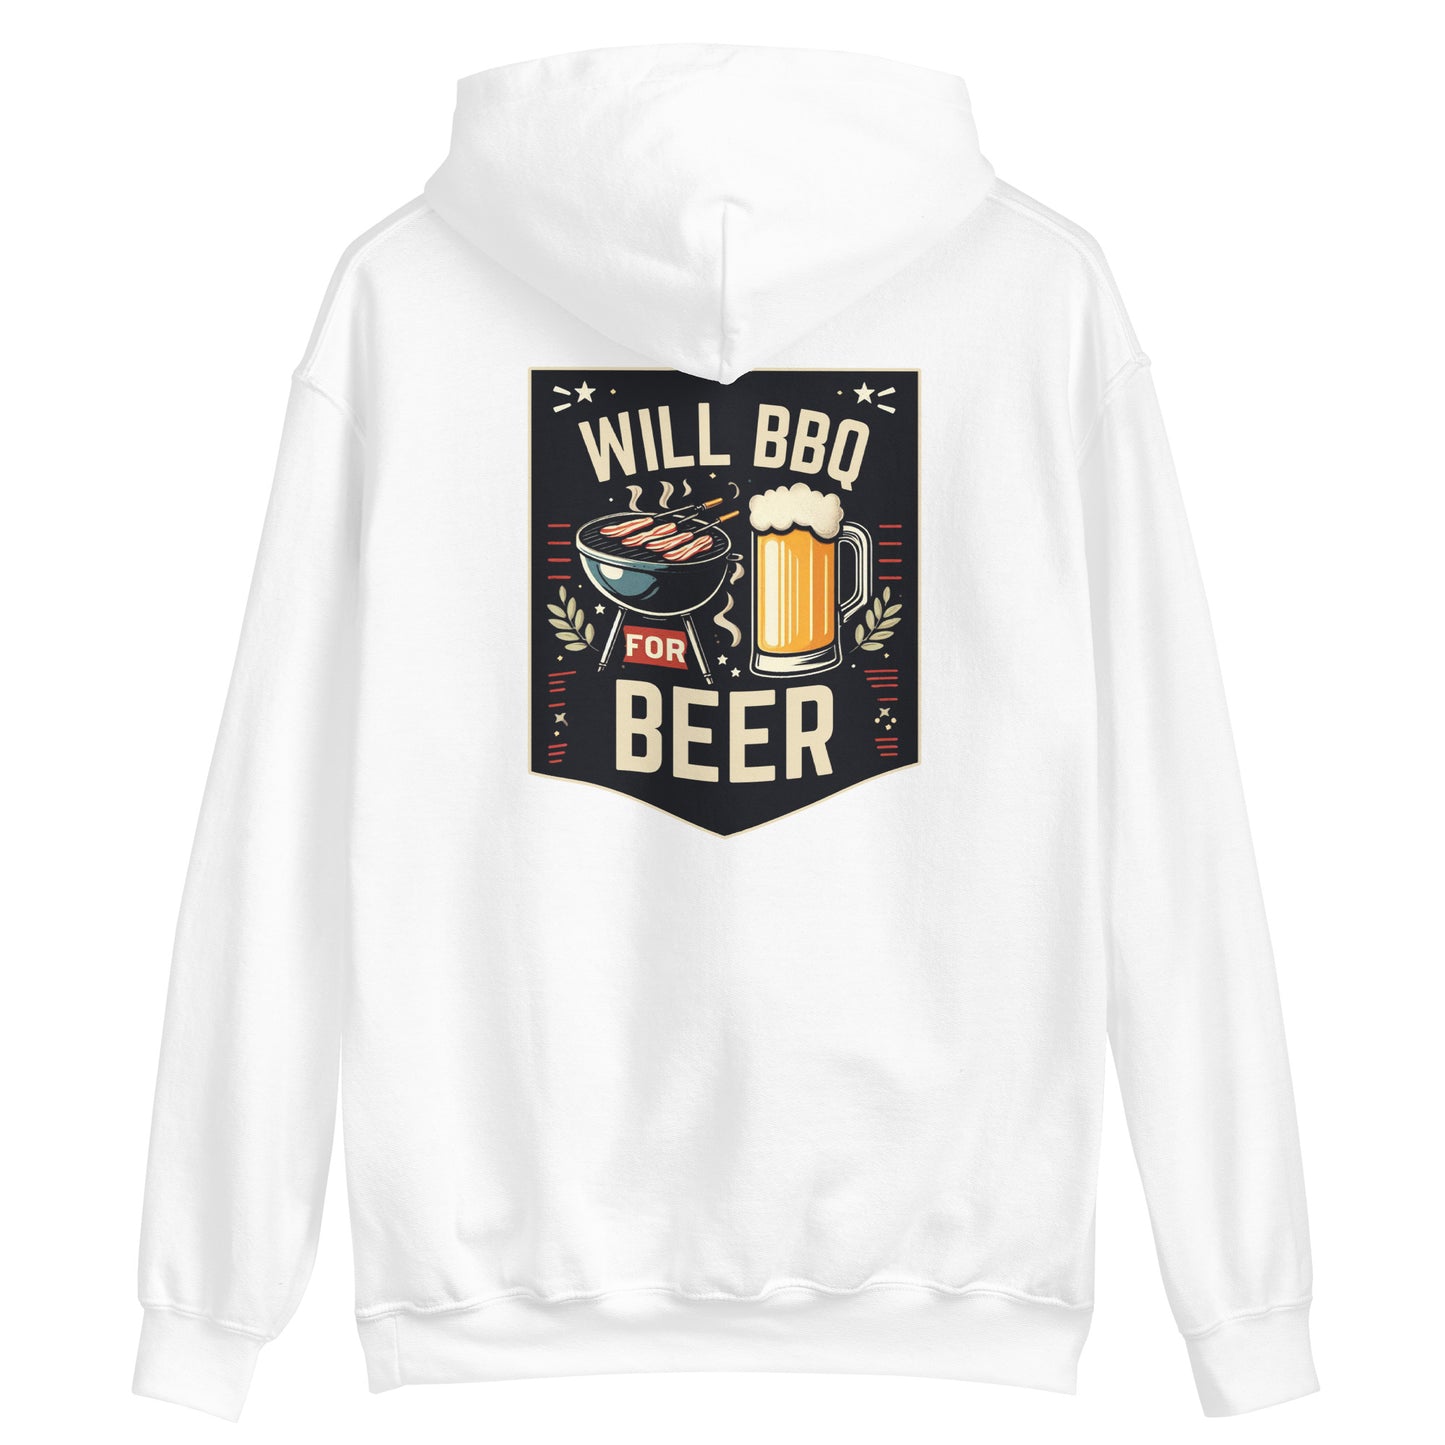 BBQ For Beer Hoodie